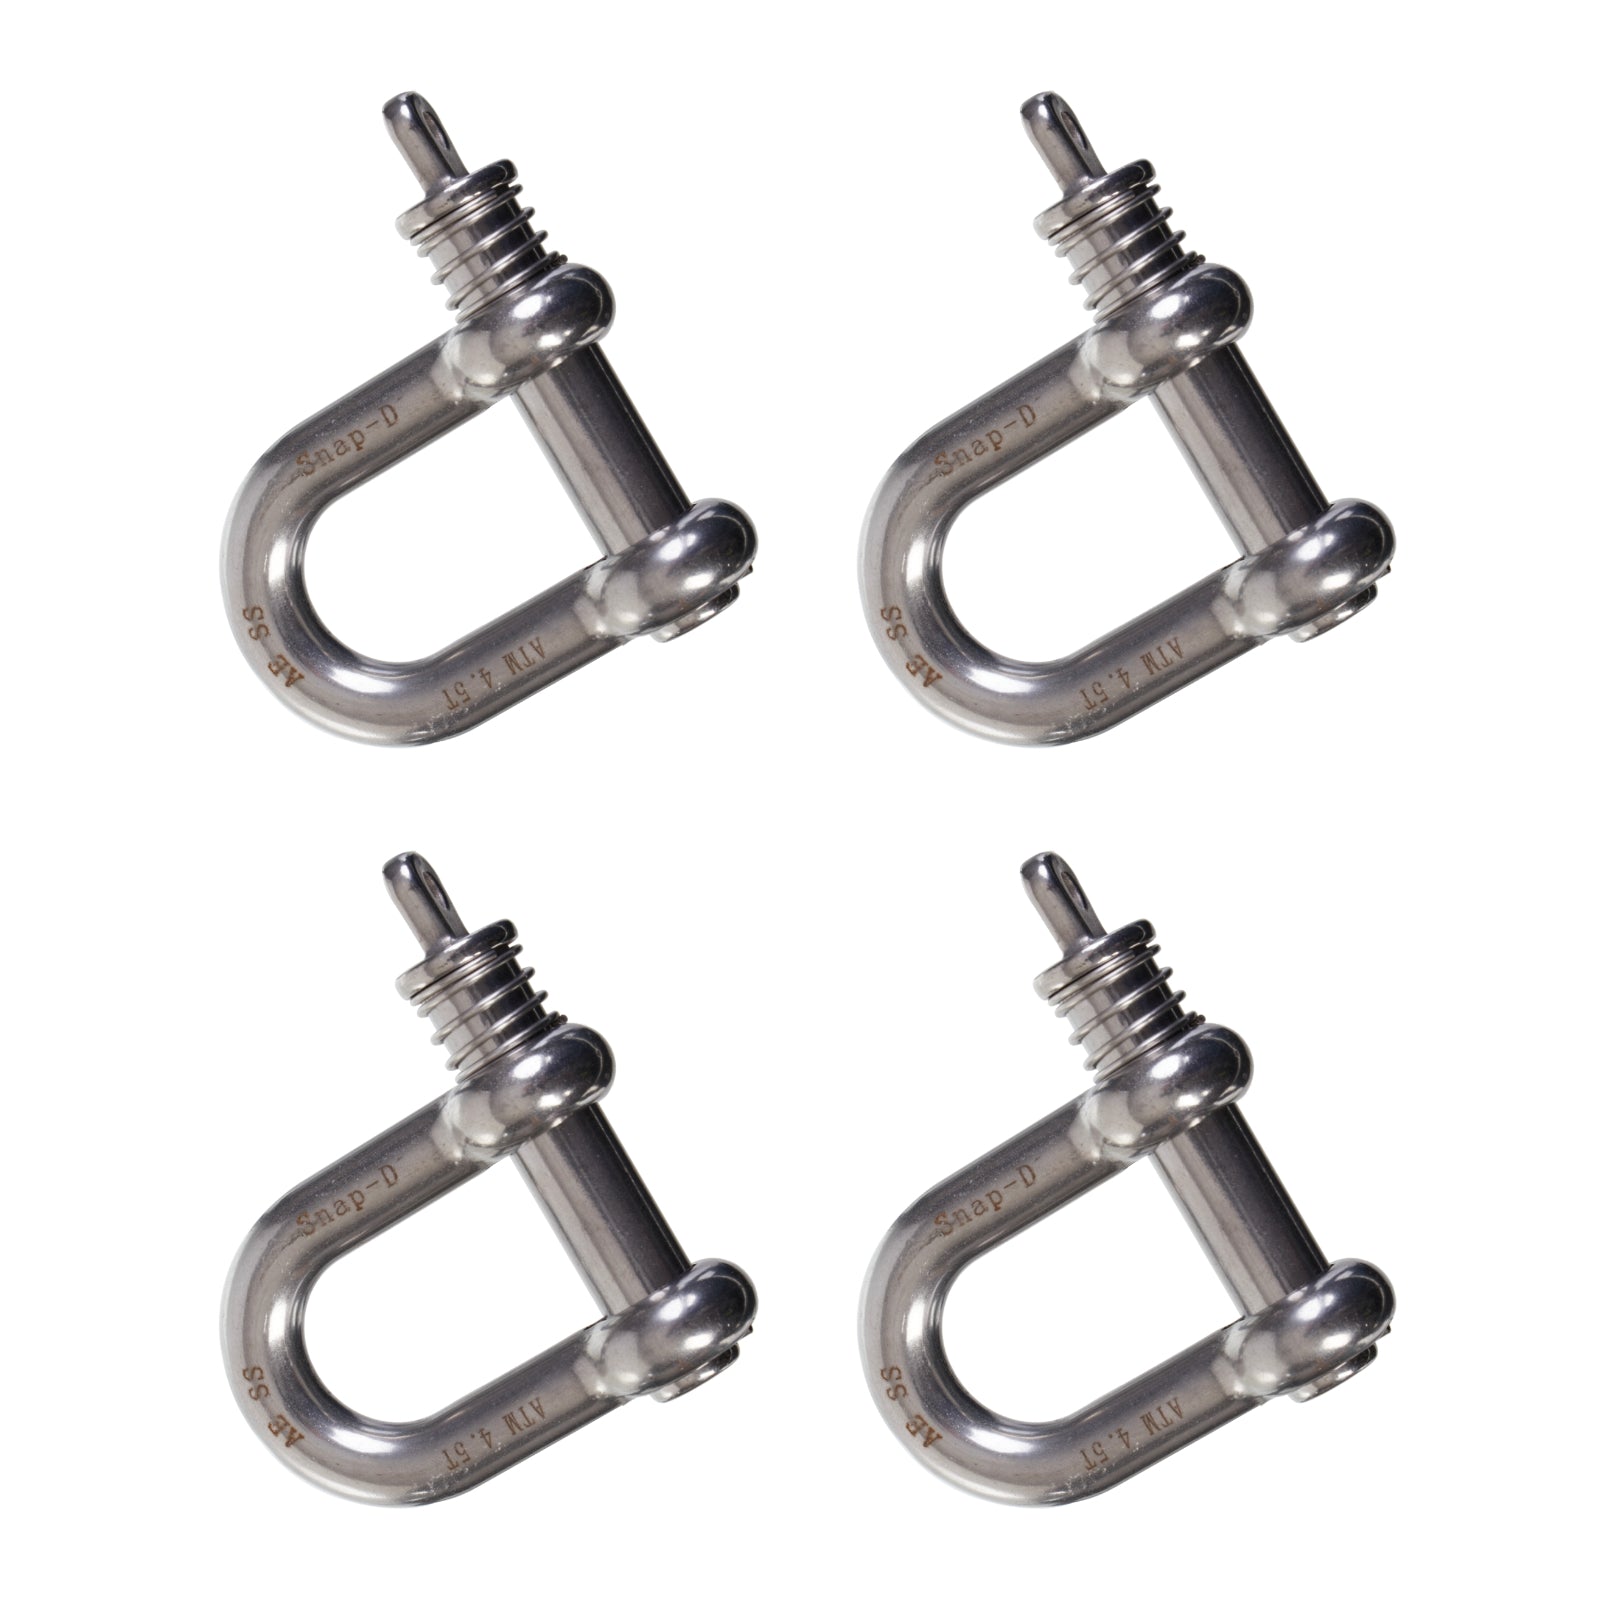 New SNAP-D 17mm D Shackle - 4 Pack Special #SD17DSS4PK